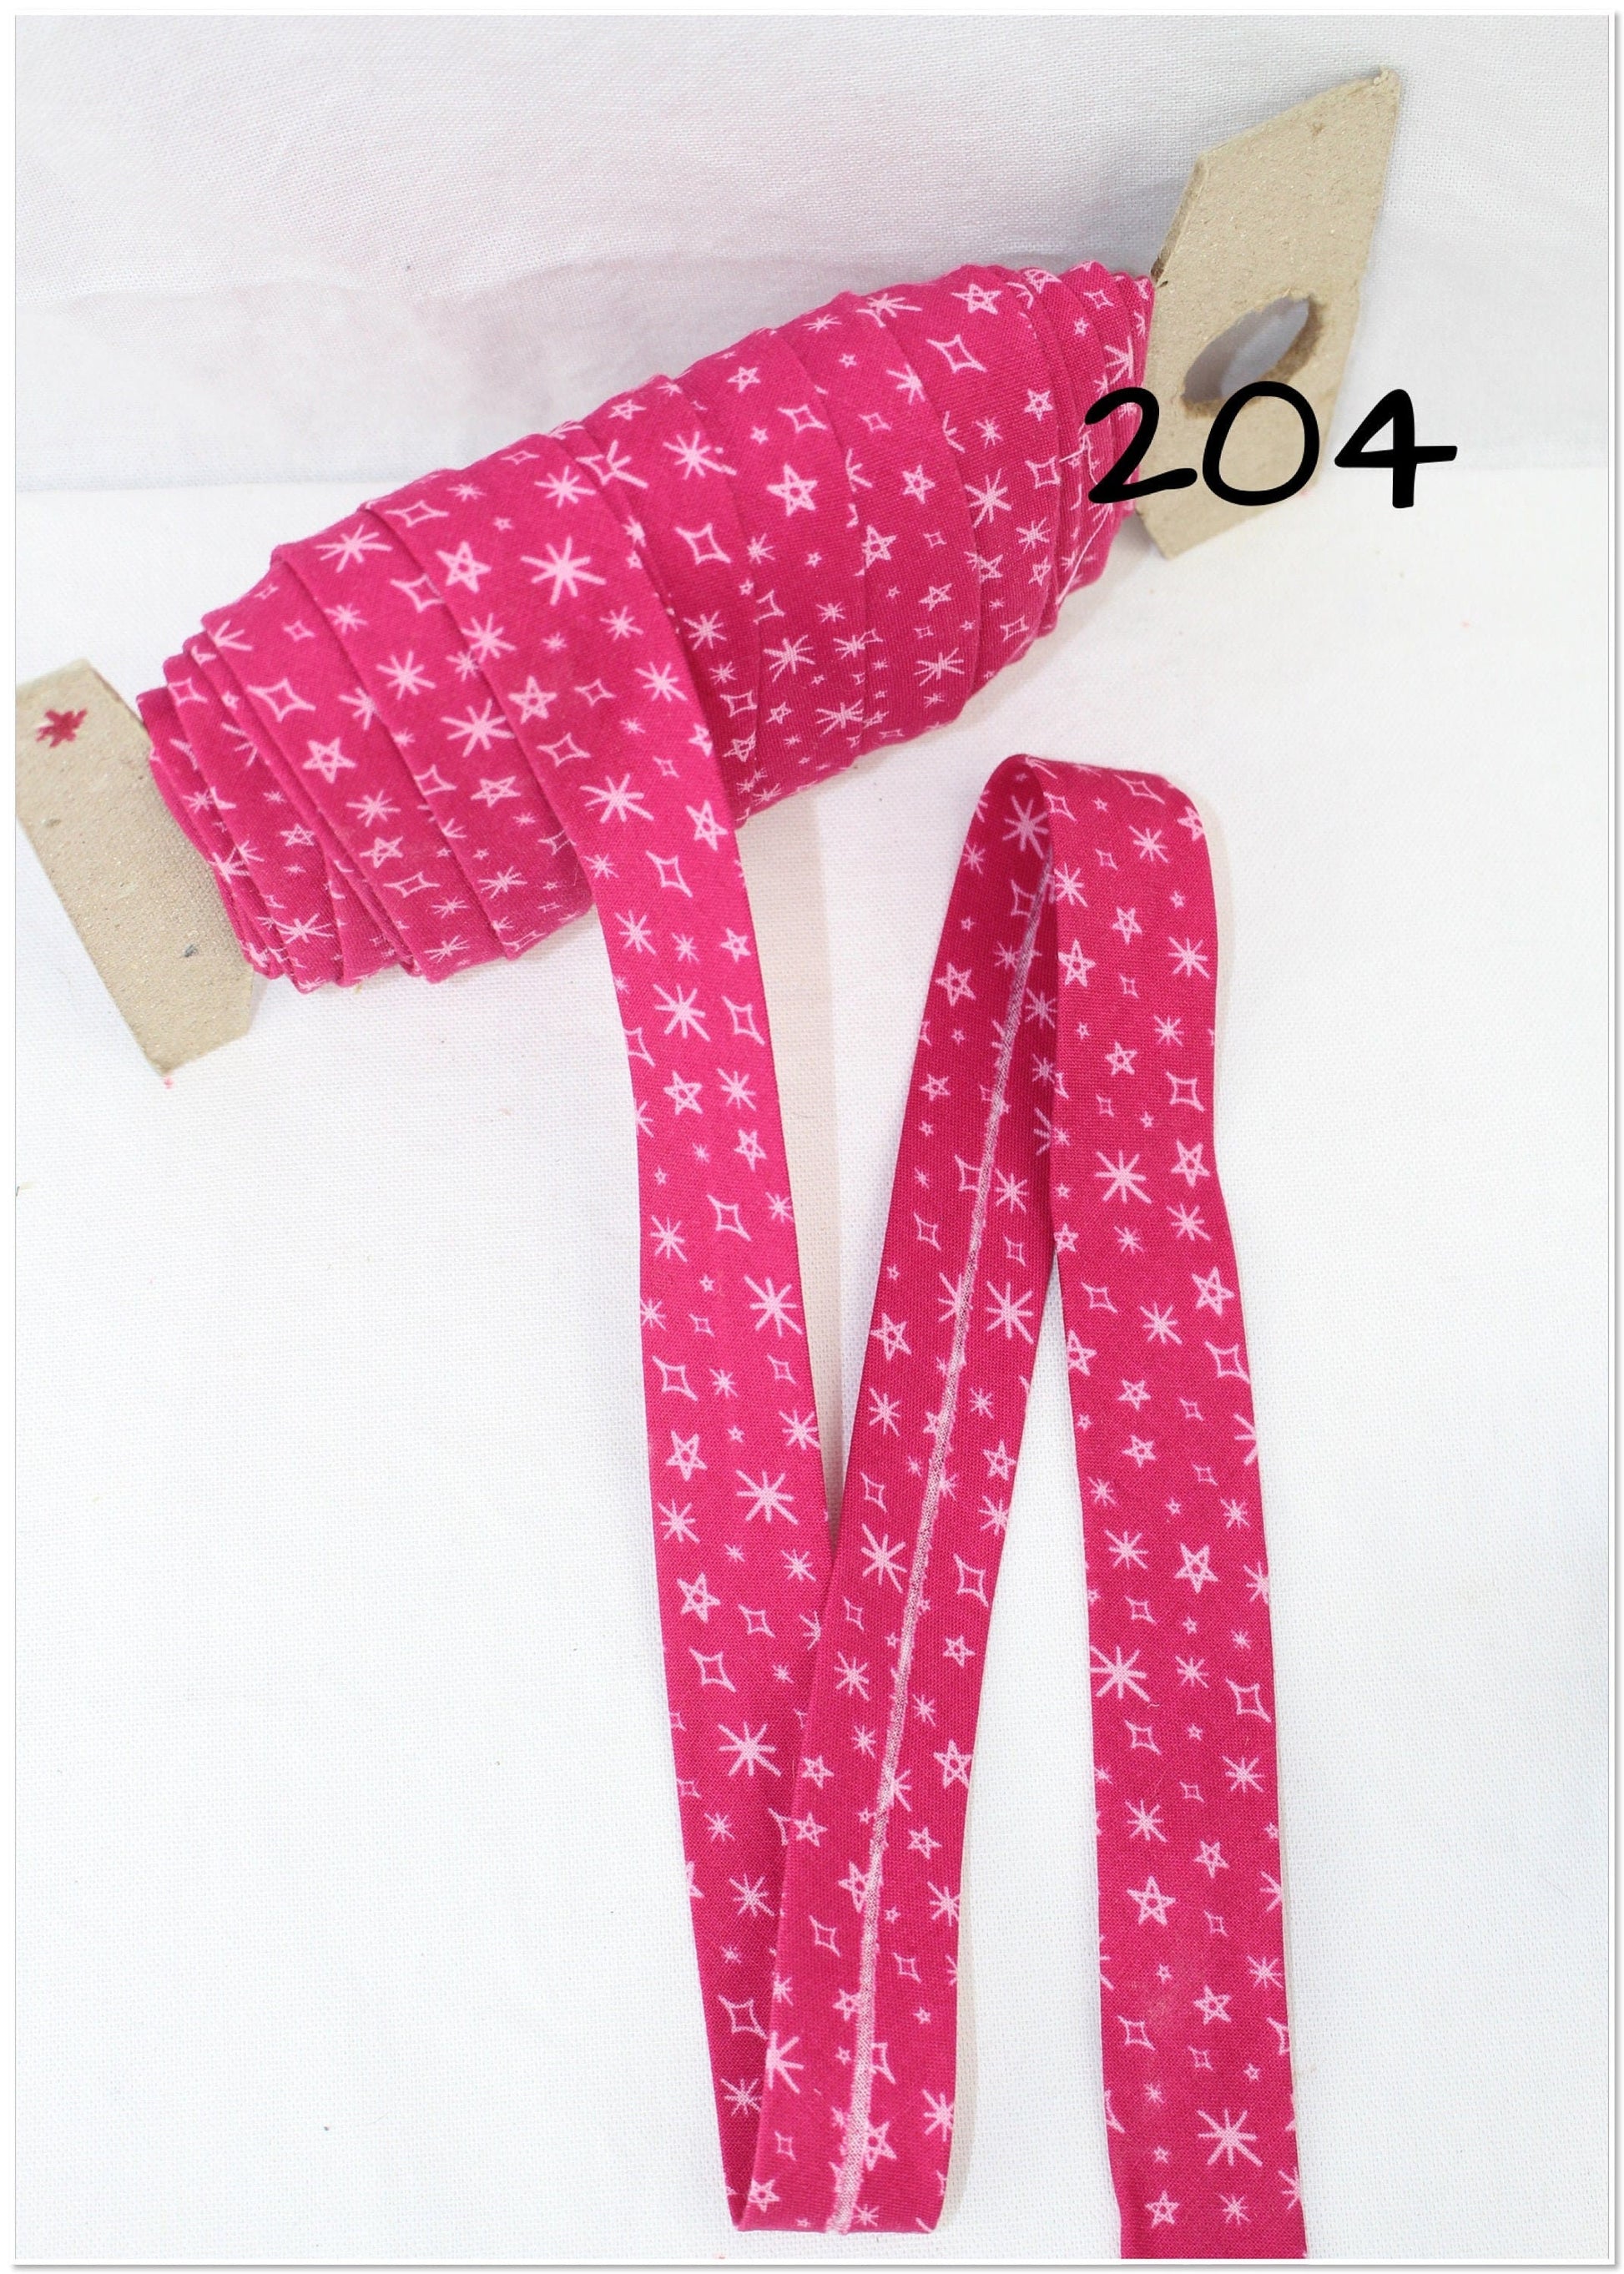 Bias Binding (Tape) 25mm, Cotton, Single Fold, pink ribbon, pink, patterned. Fusible iron on available.